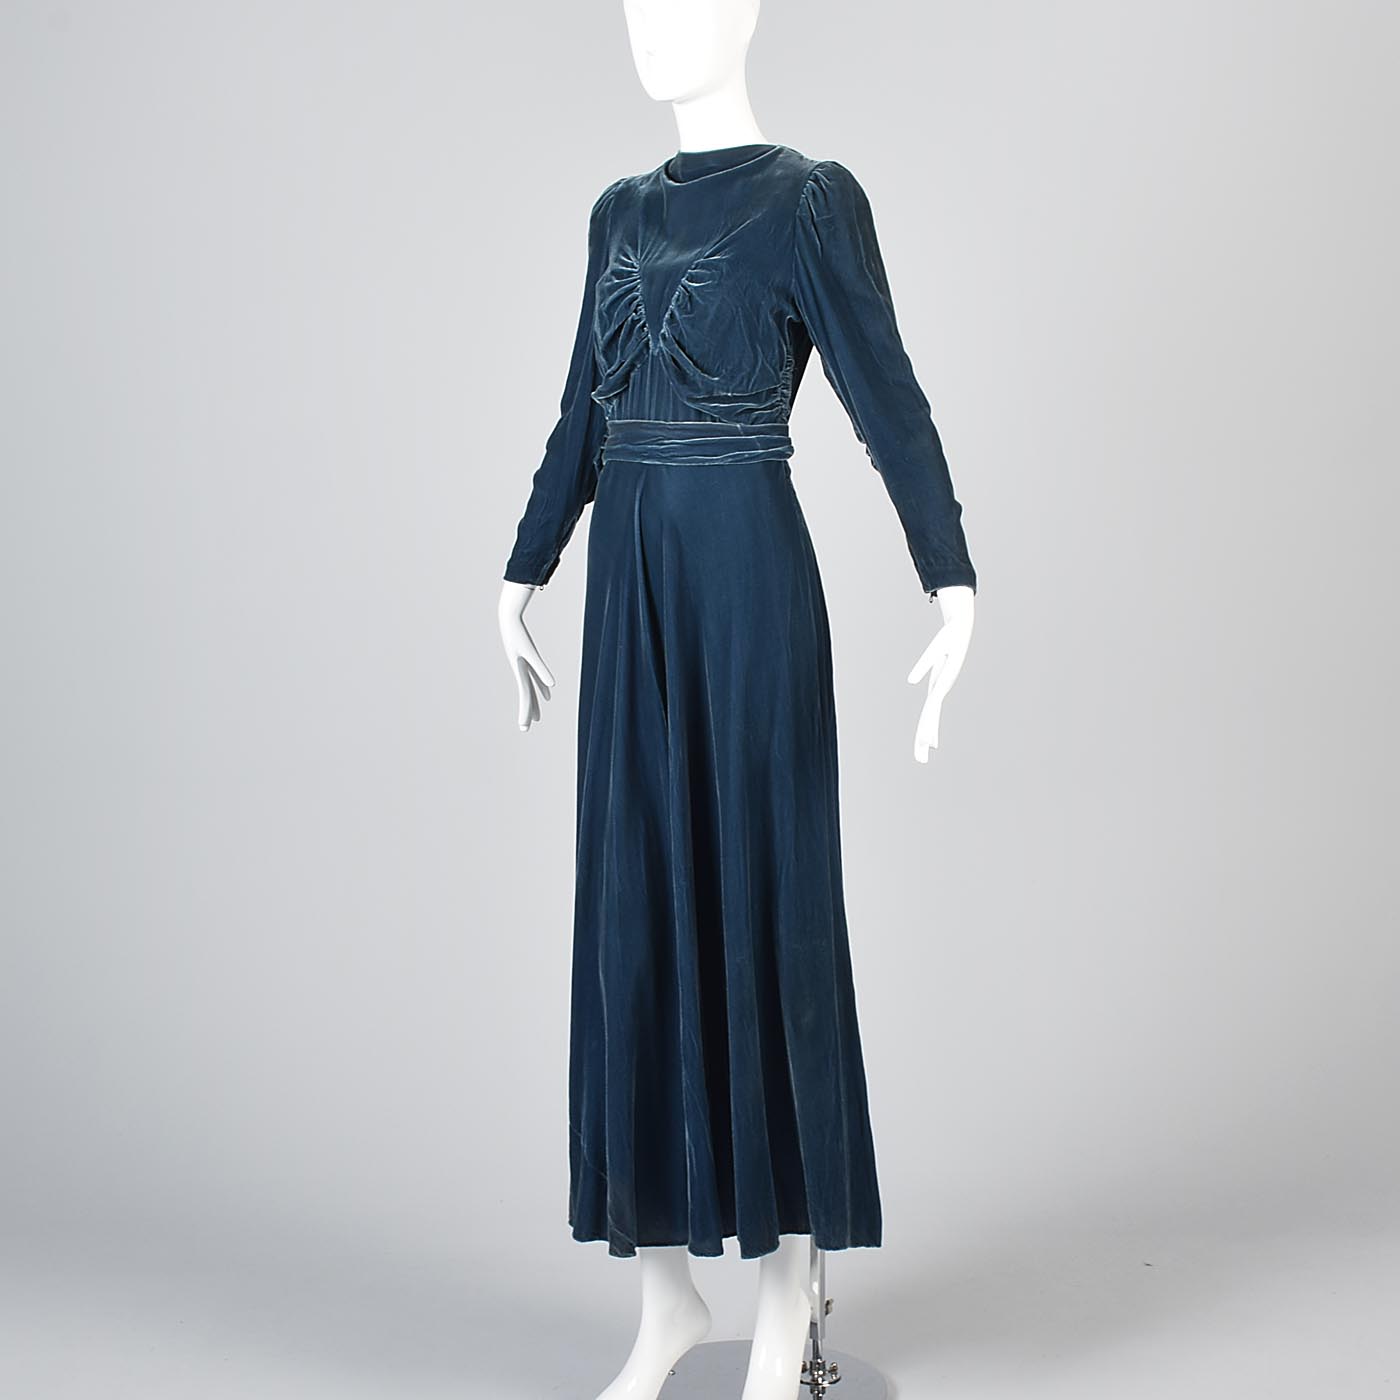 1930s Blue Velvet Gown with Gathered Bodice